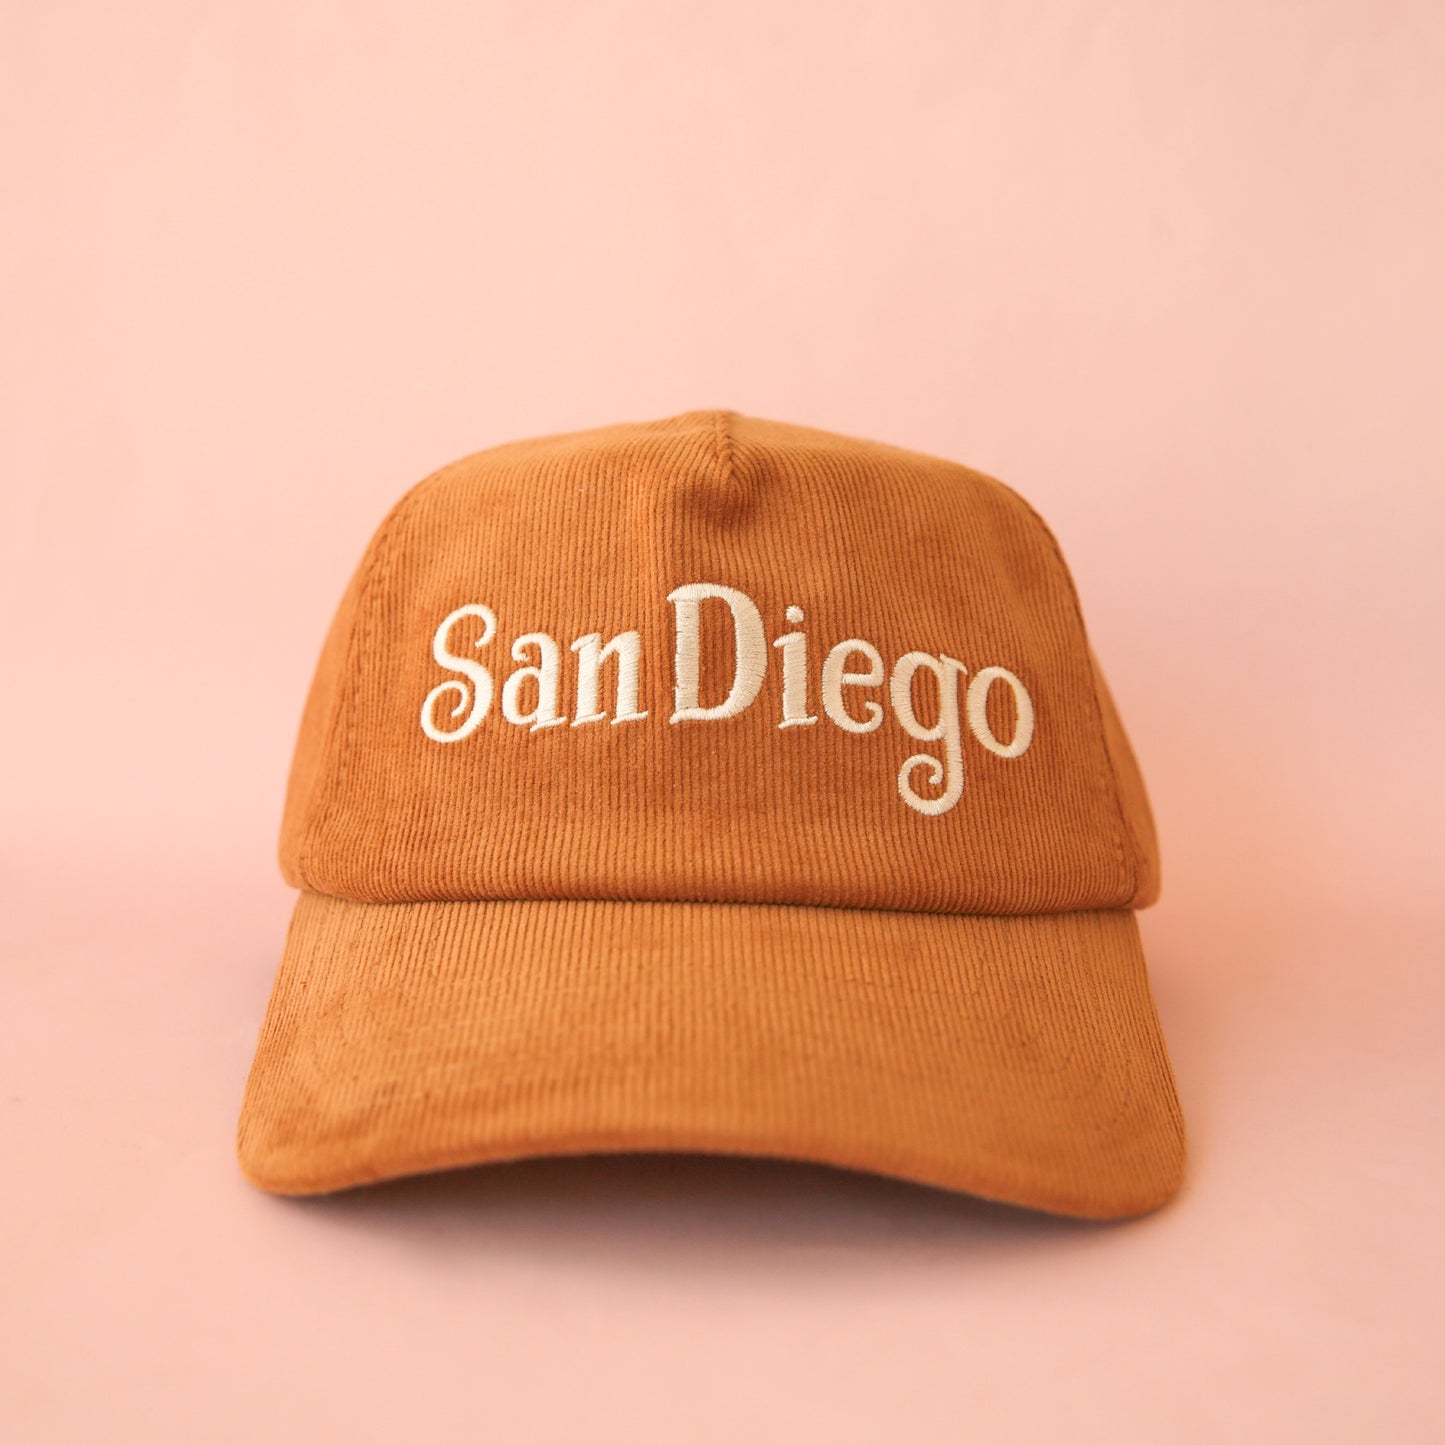 On a pink background is a toffee colored baseball cap that has a corduroy texture and says, "San Diego" in white lettering.